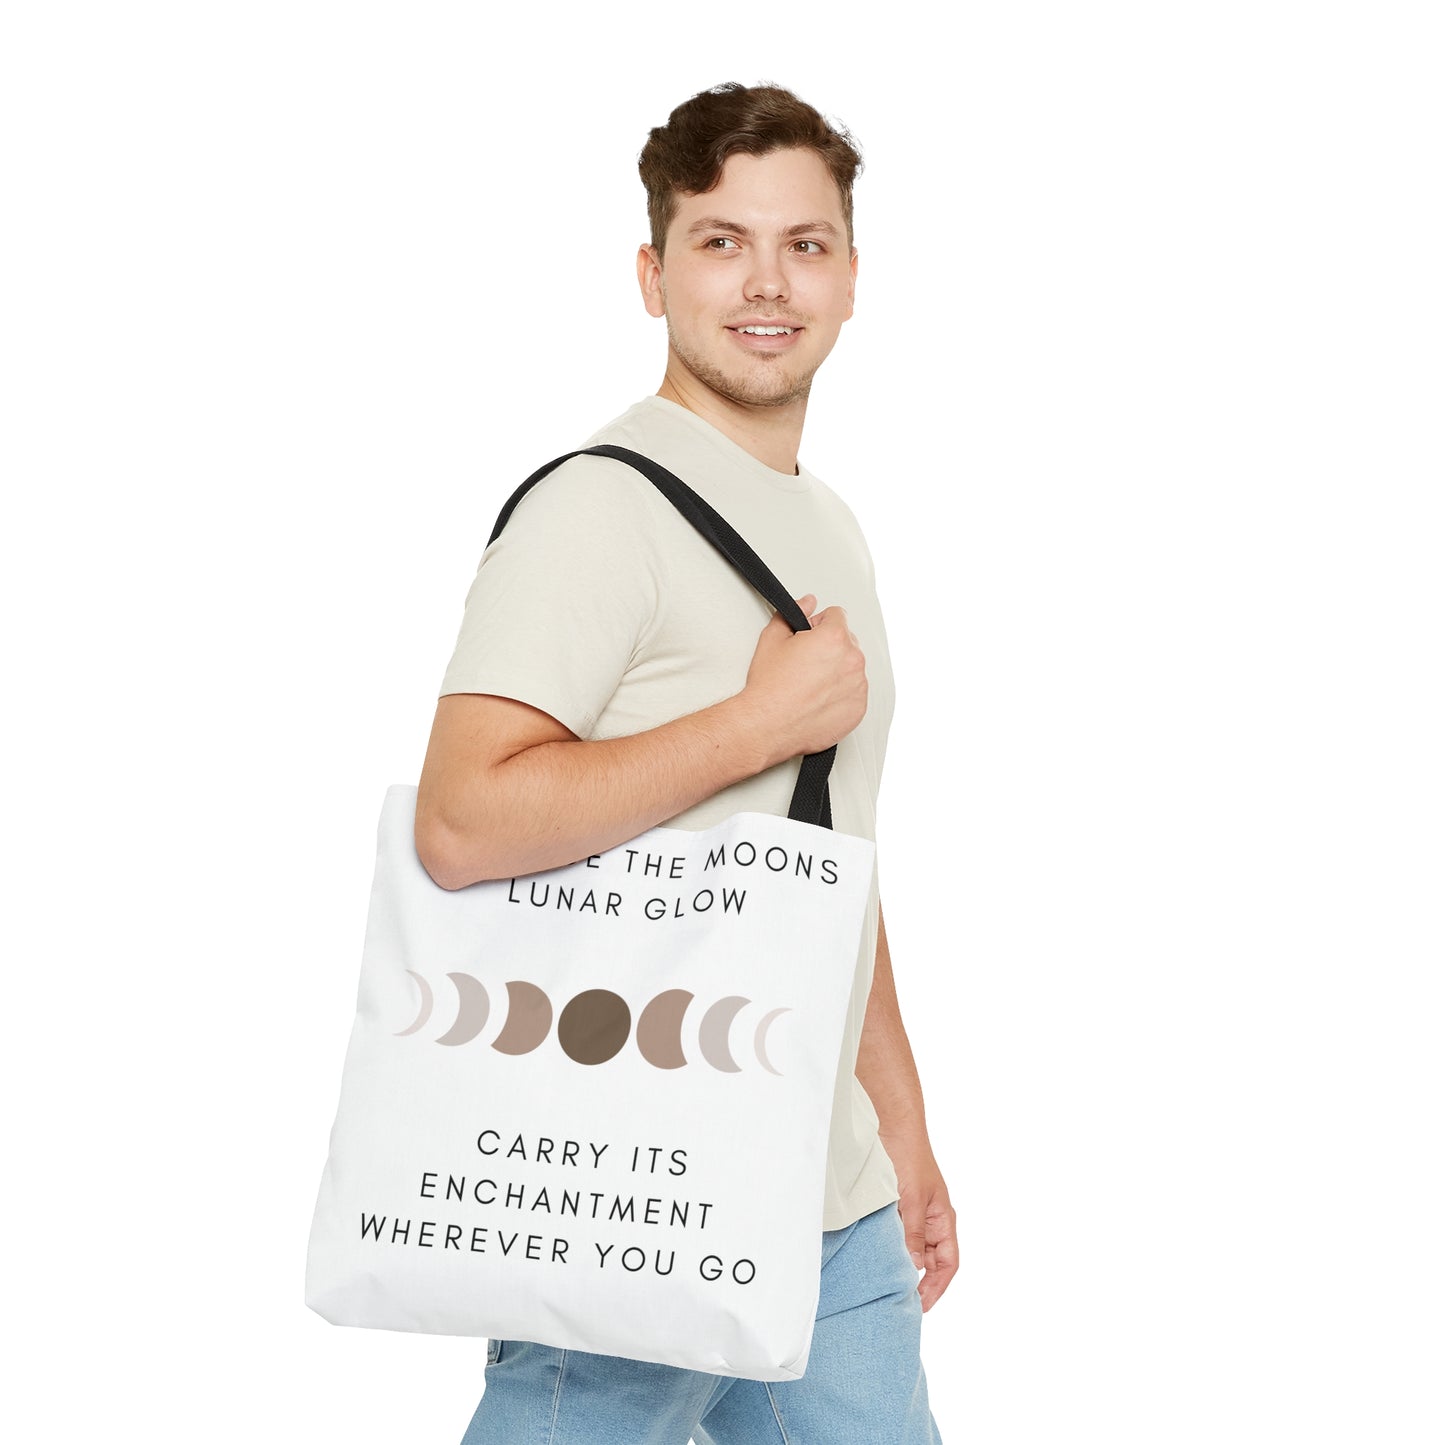 Tote Bag for Anything